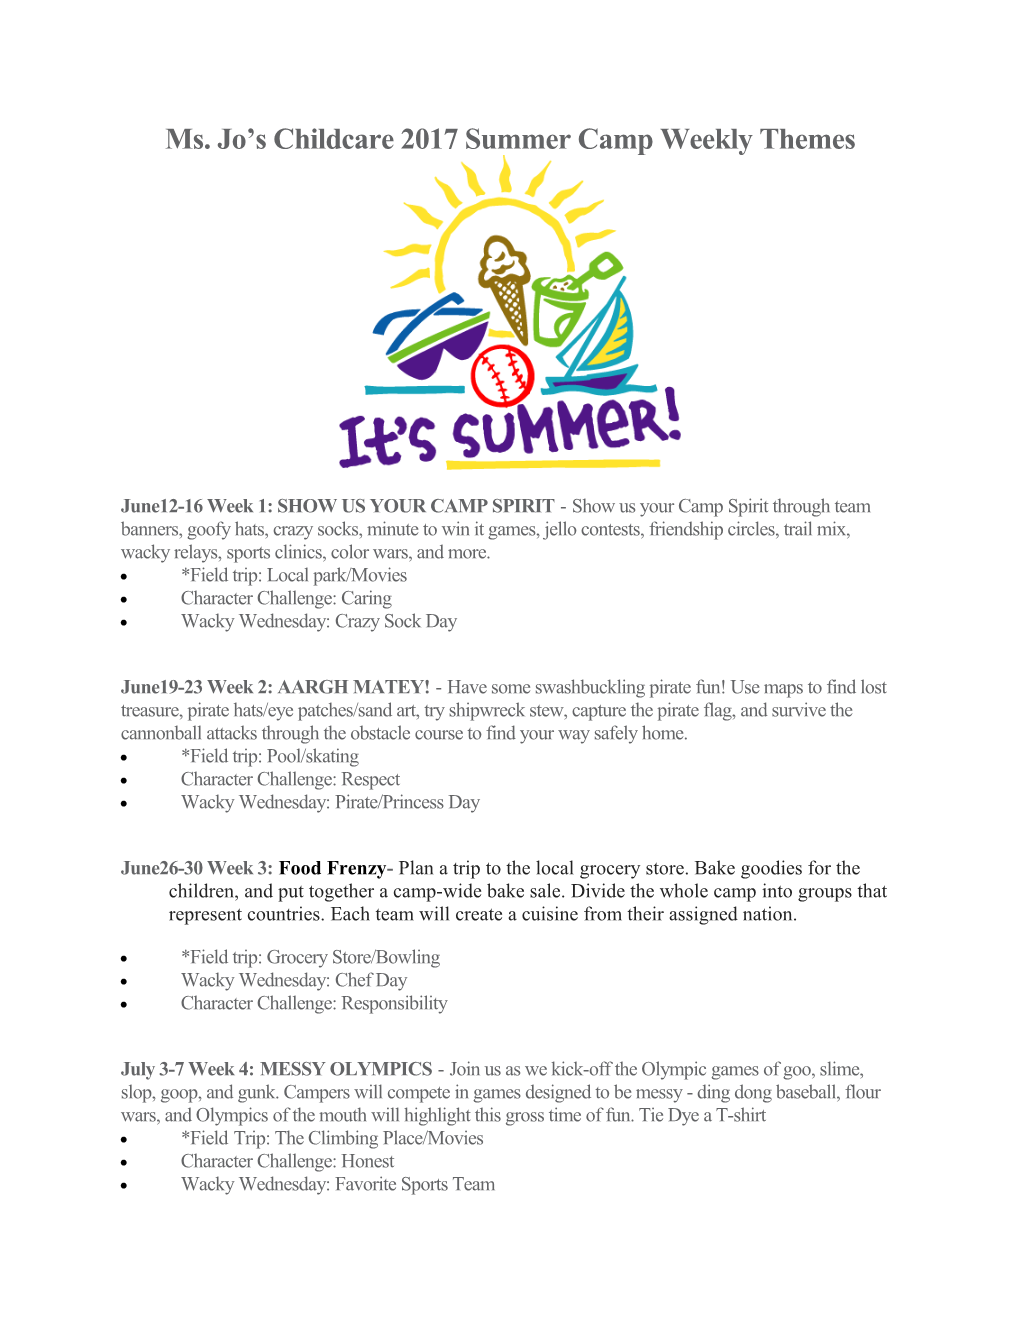 Ms. Jo S Childcare 2017 Summer Camp Weekly Themes